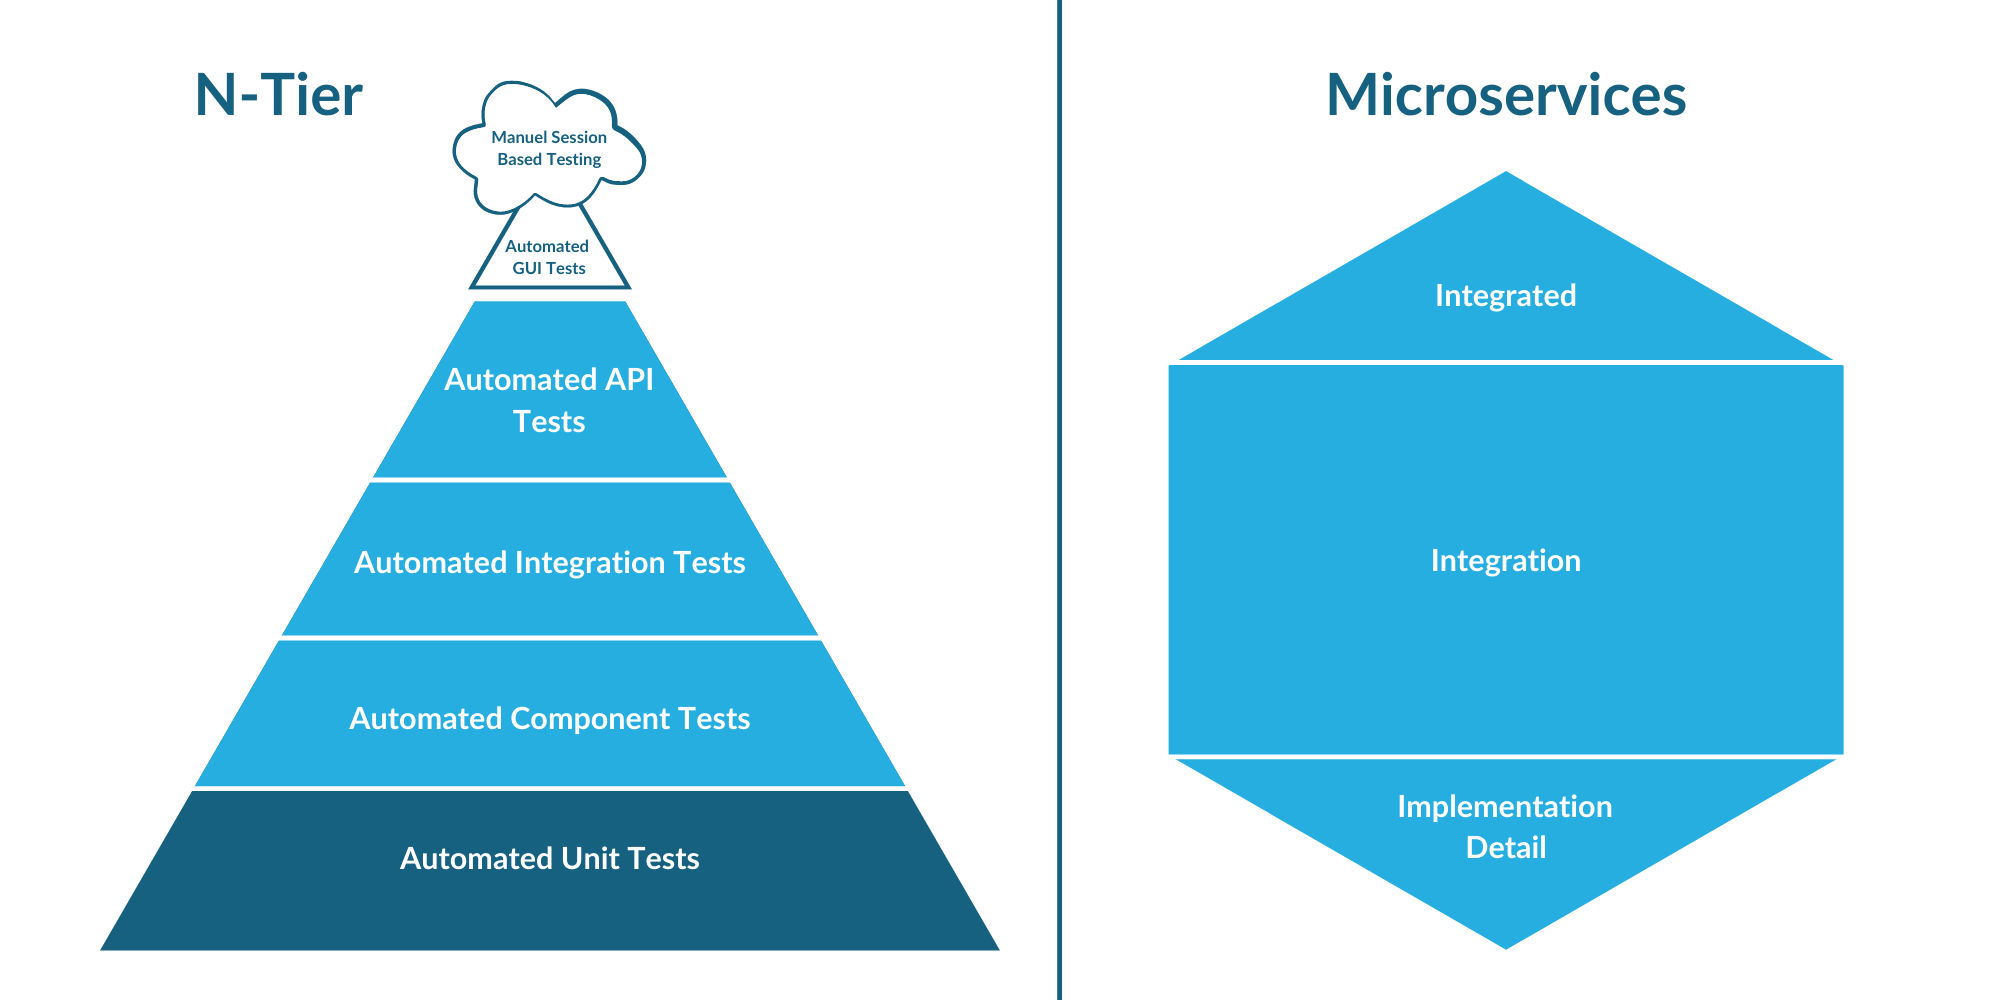 This slide shows visuals of where manual and automation testing falls in two architecture types, N-Tier on the left, and microservices on the right to enable agile delivery. For N-Tier, there is a triangle, divided into sections. The bottom, largest section is blue and says “Automated Unit Tests.” The next 3 sections are green and from largest to smallest or bottom to top, read “Automated Component Tests, Automated Integration Tests,” and Automated API Tests. The tip of the triangle is white and reads “Automated GUI Tests.” At the very top of the triangle, there is a cloud shape and inside it is labeled, “Manuel Session Based Testing.” On the right, the Microservices image is a hexagon. It is divided into 3 sections and reads from top to bottom, “Integrated,” “Integration,” and “Implementation Detail.”